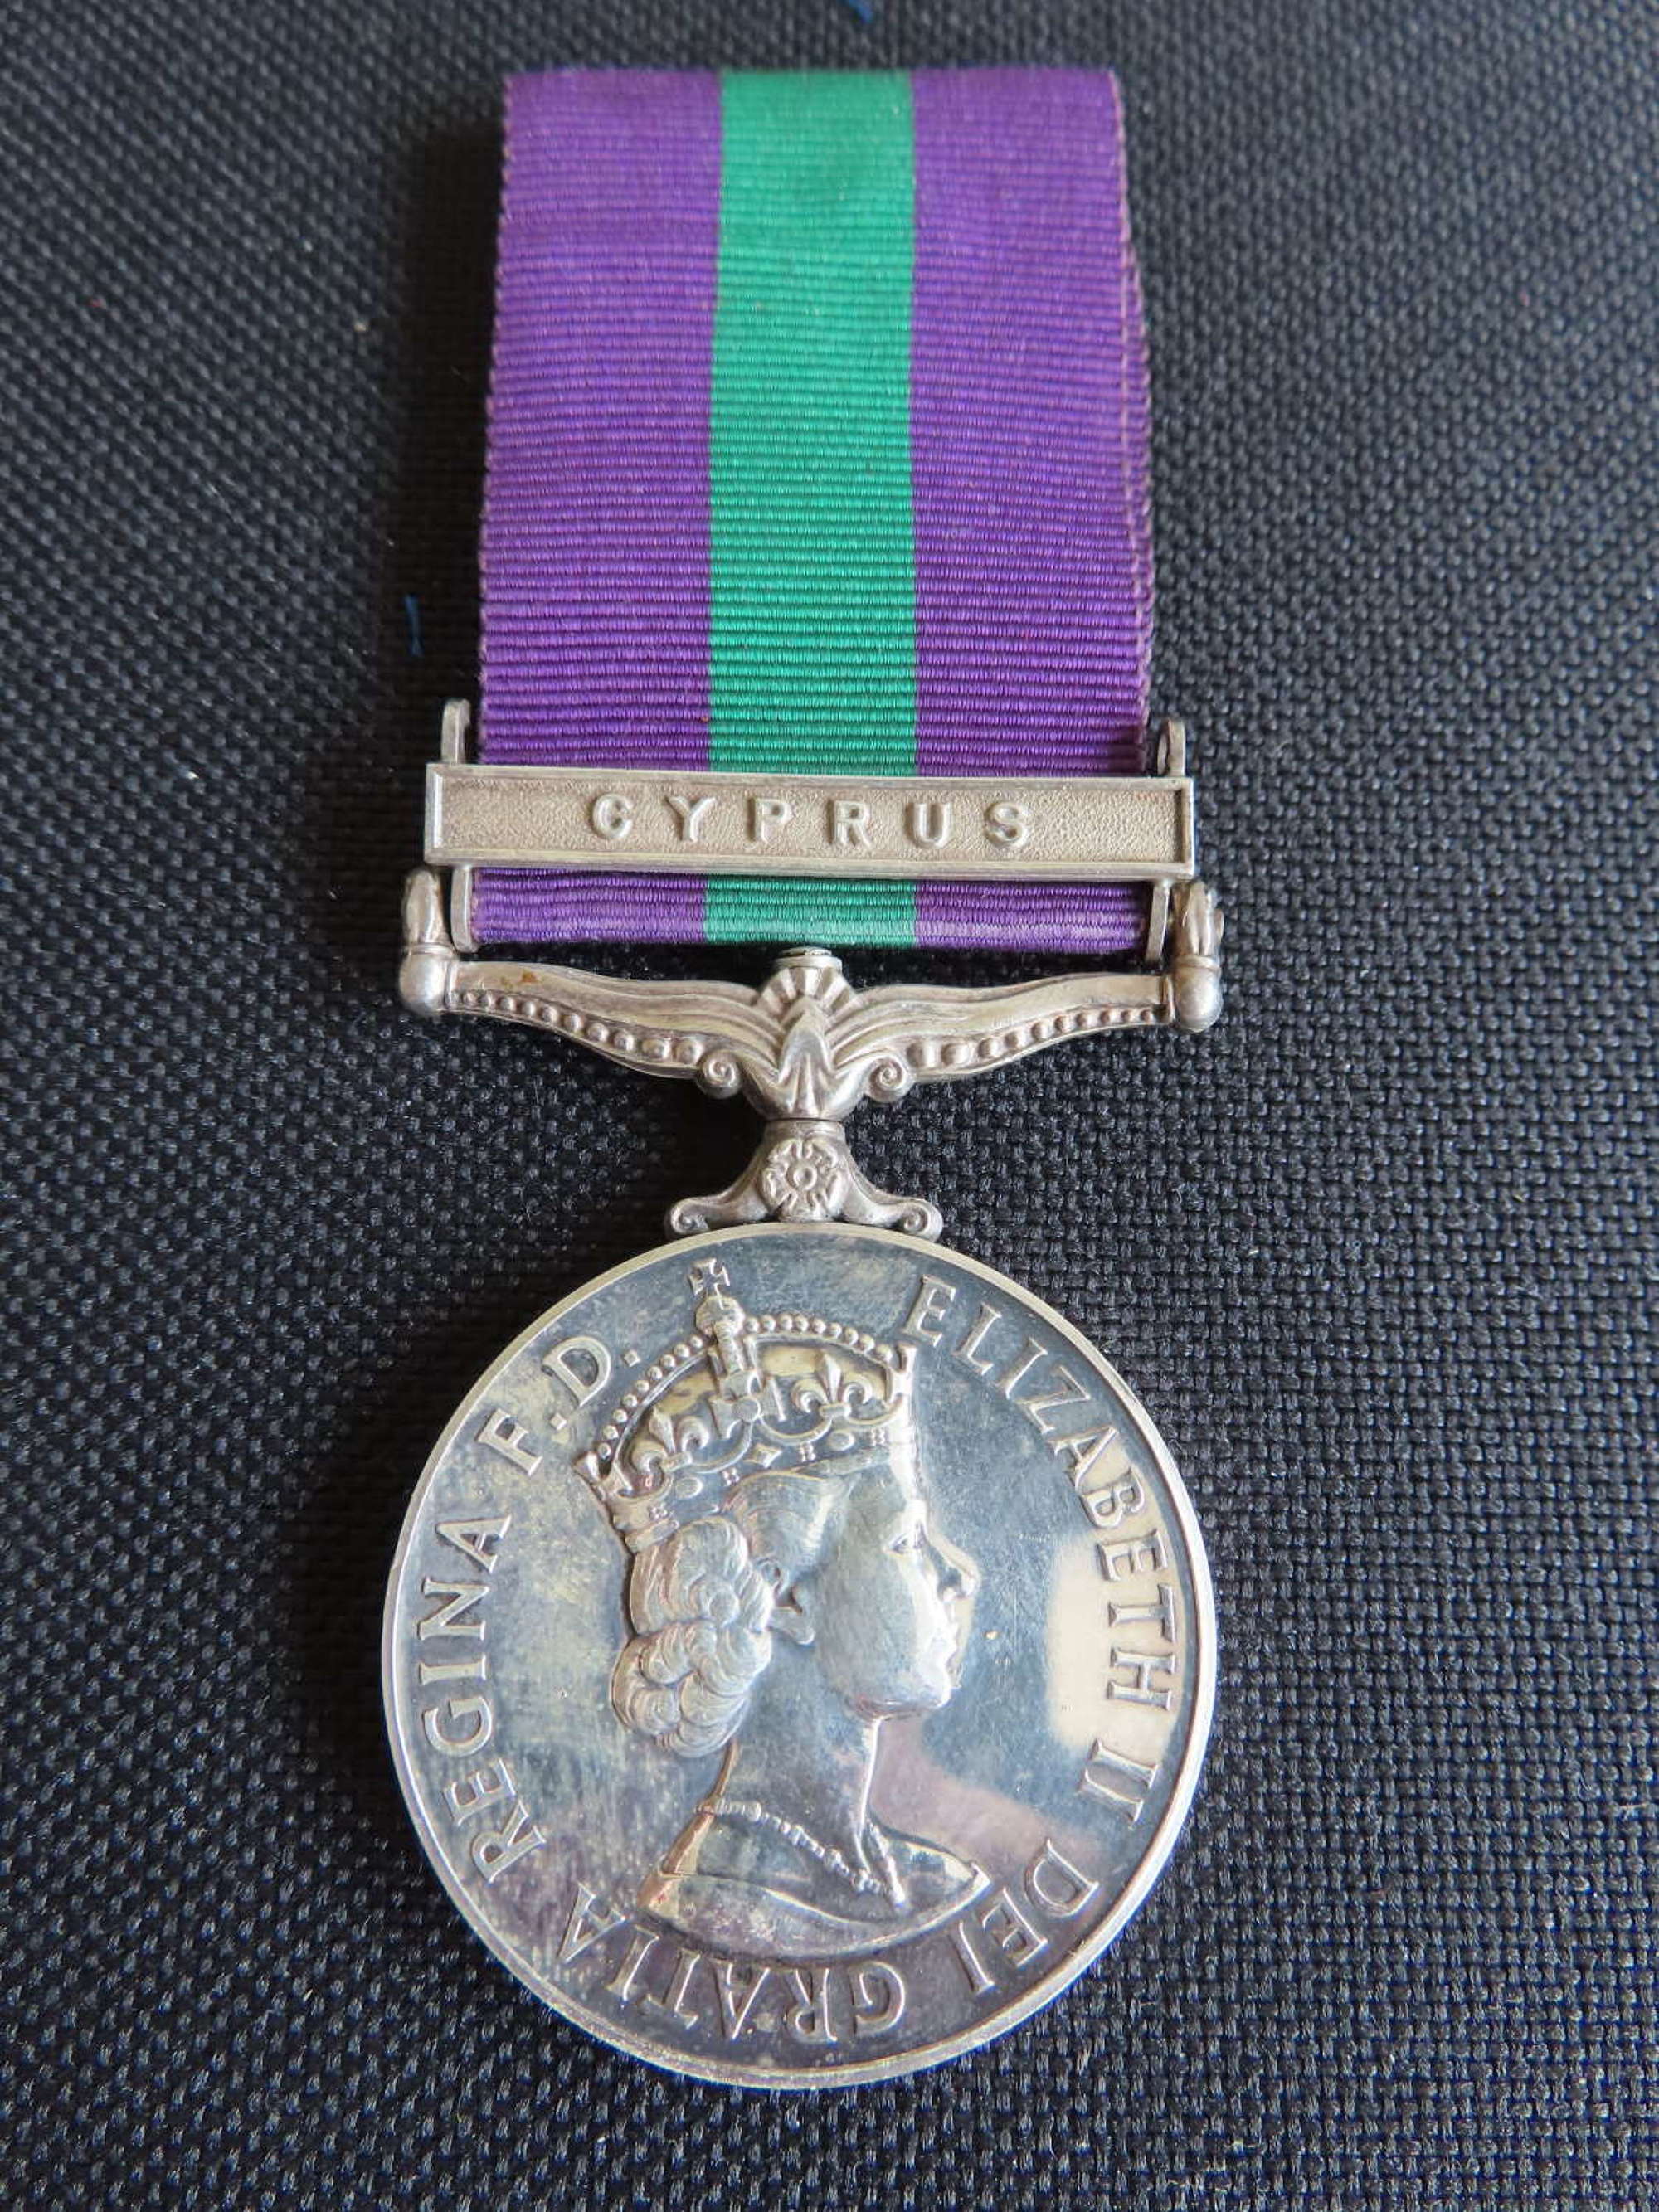 Cyprus general service medal awarded to Spr Smith Royal Engineers